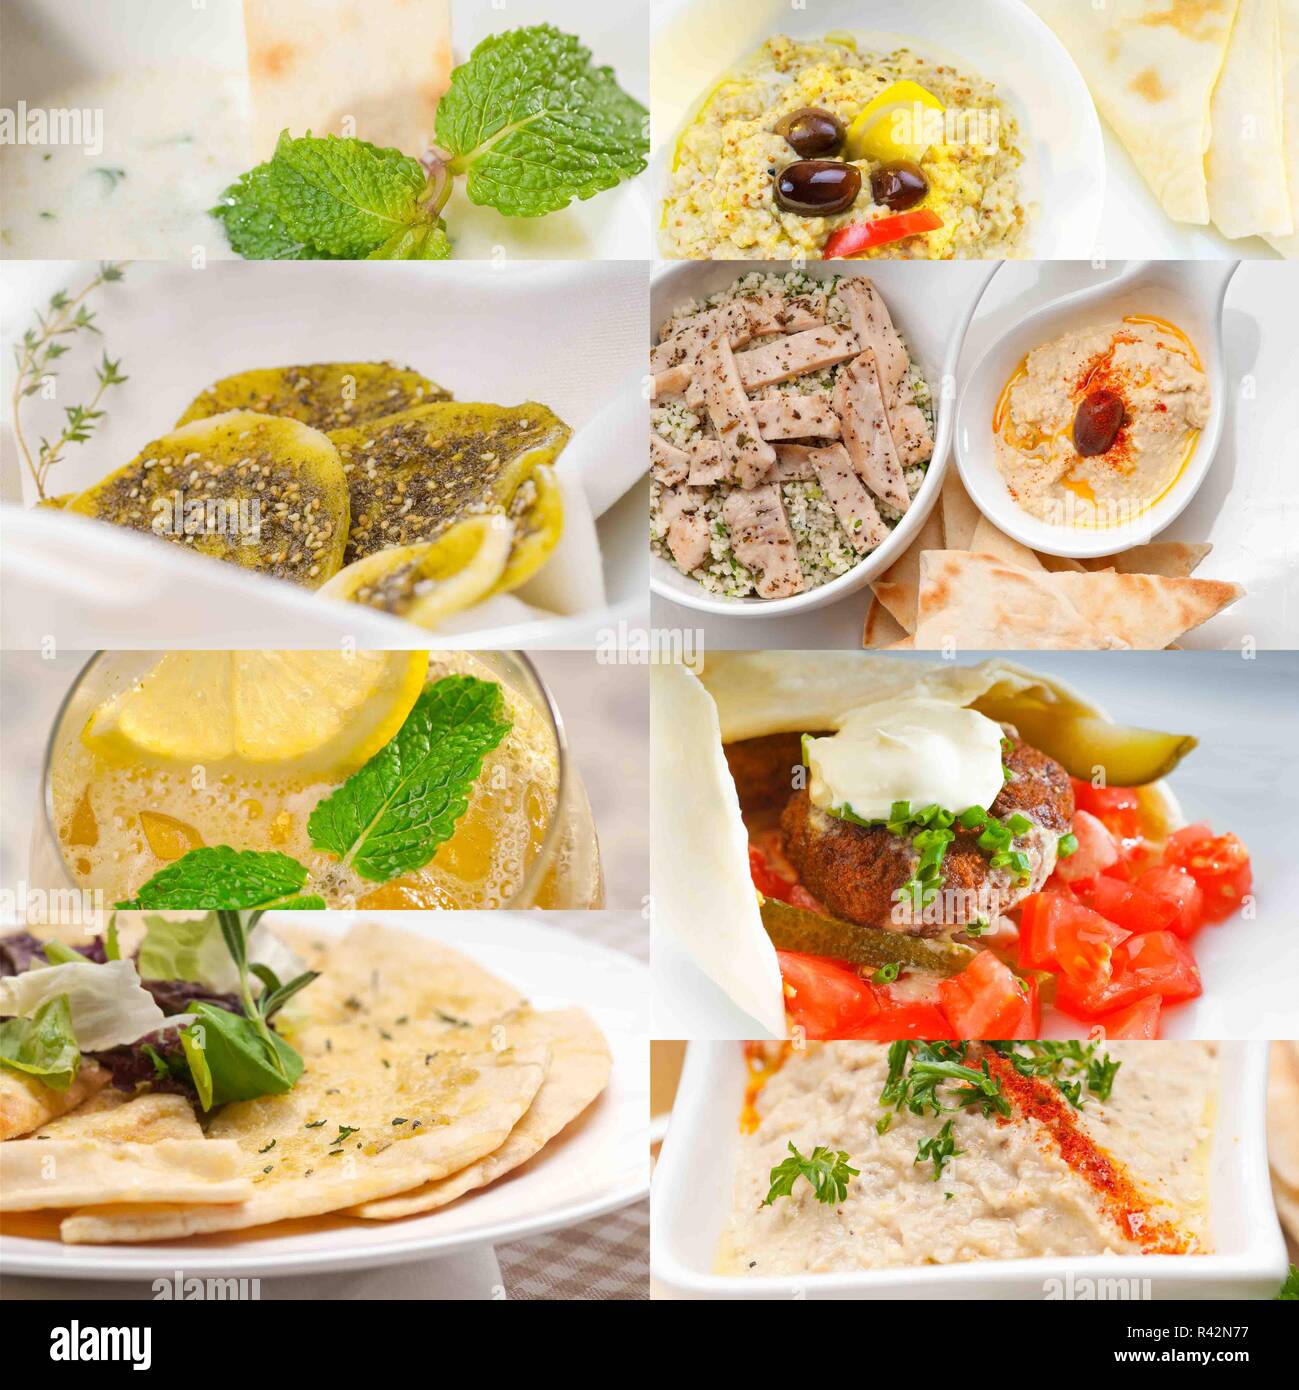 Middle East food collage Banque D'Images